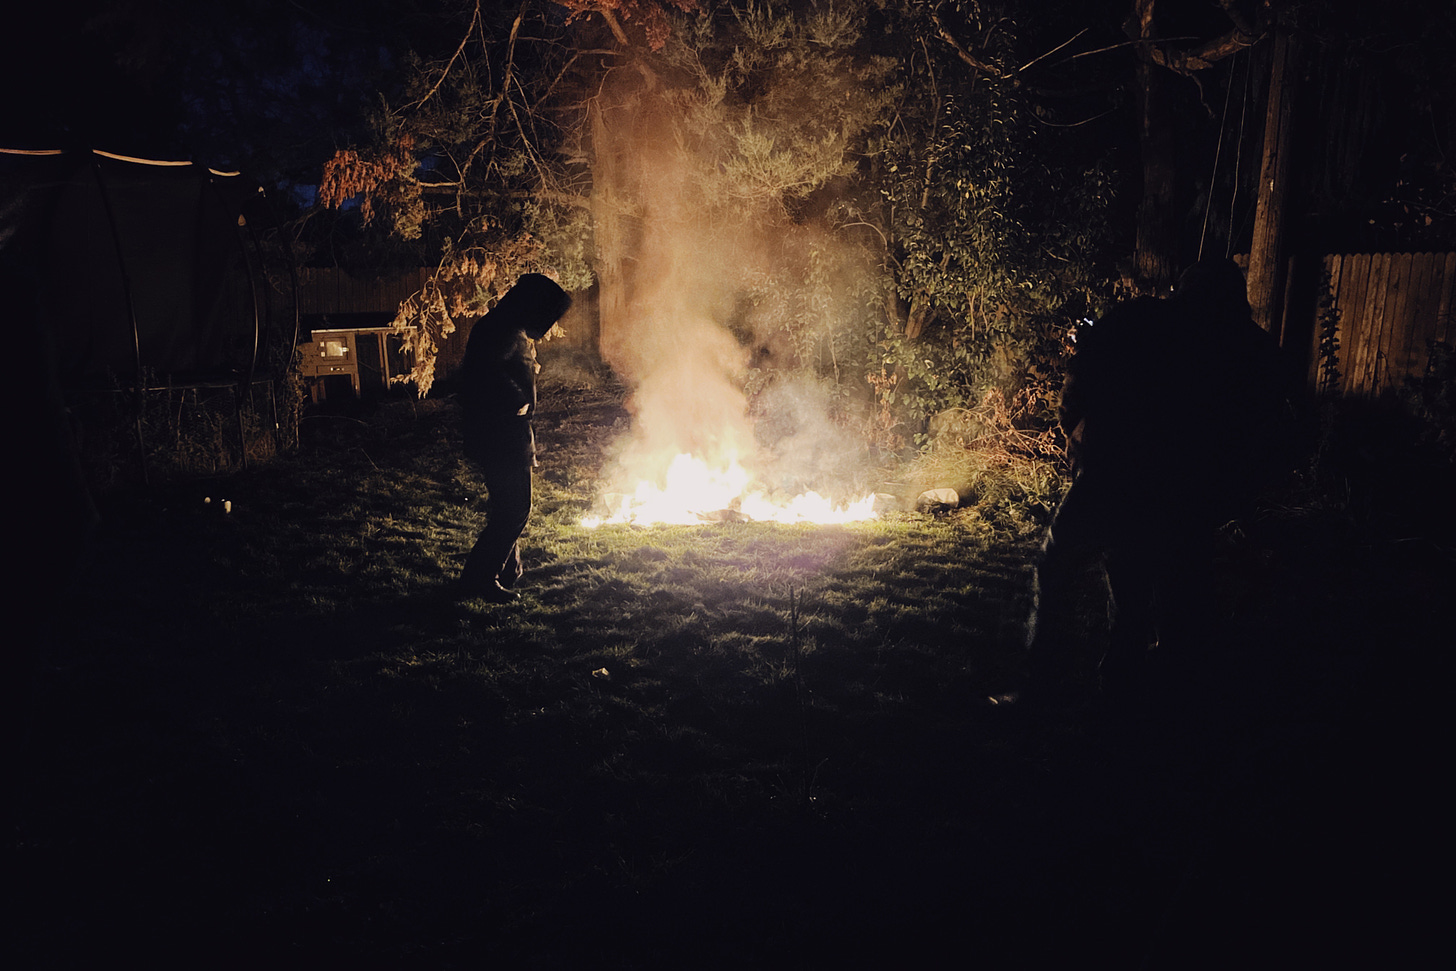 A photograph of the Patriot Front flag, which has been lit on fire and is burning on the ground. Almost nothing is left. Two shadowy figures stand off to the sides, illuminated by the fire. Their surroundings are dark.